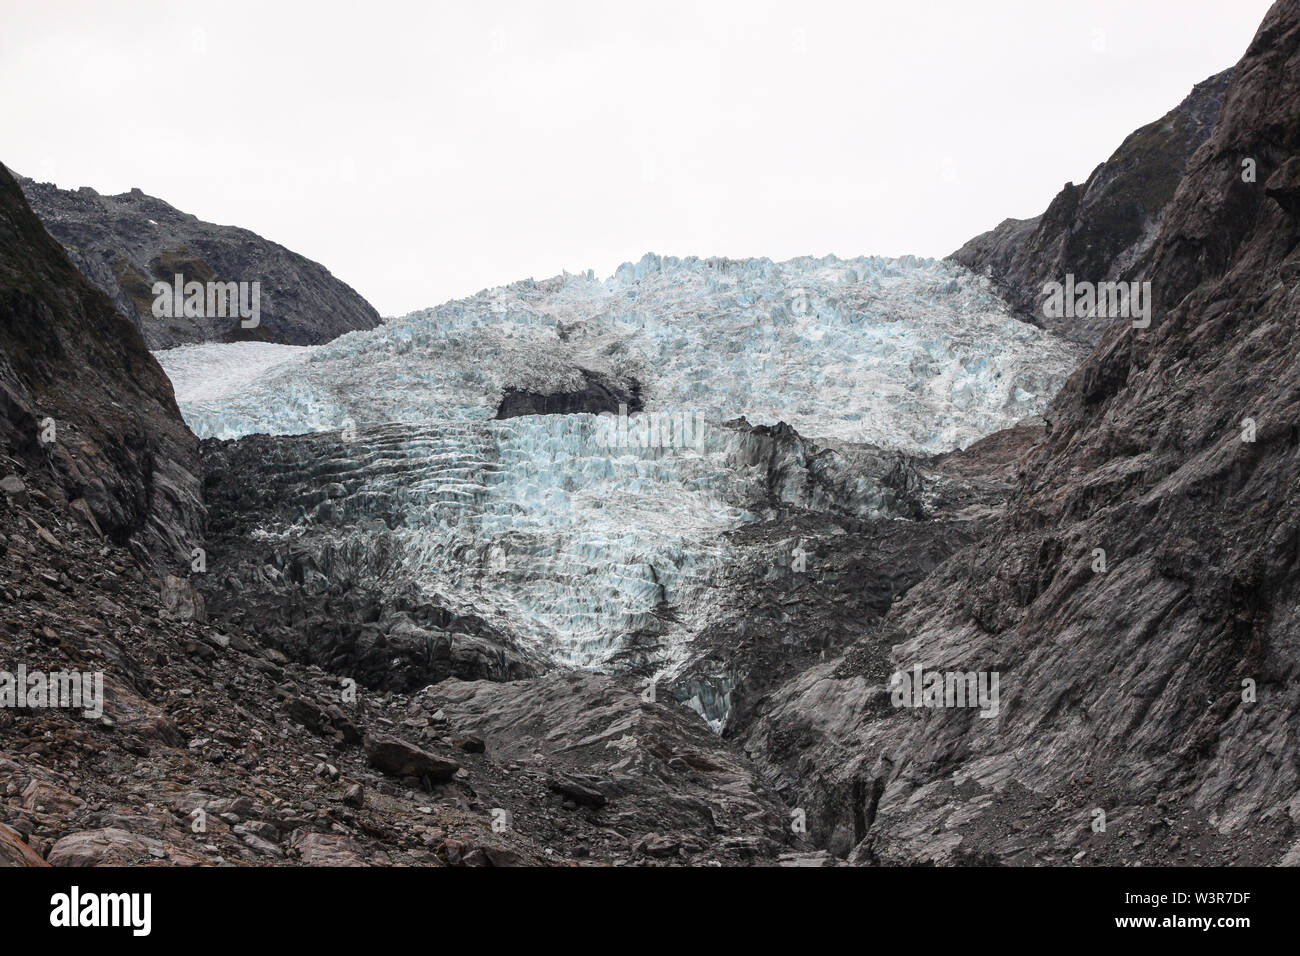 Franz Josef Glacier on a cloudy summer day in January 2018 | Westland Tai Poutini National Park, New Zealand, South Island | The Glacier it descends f Stock Photo